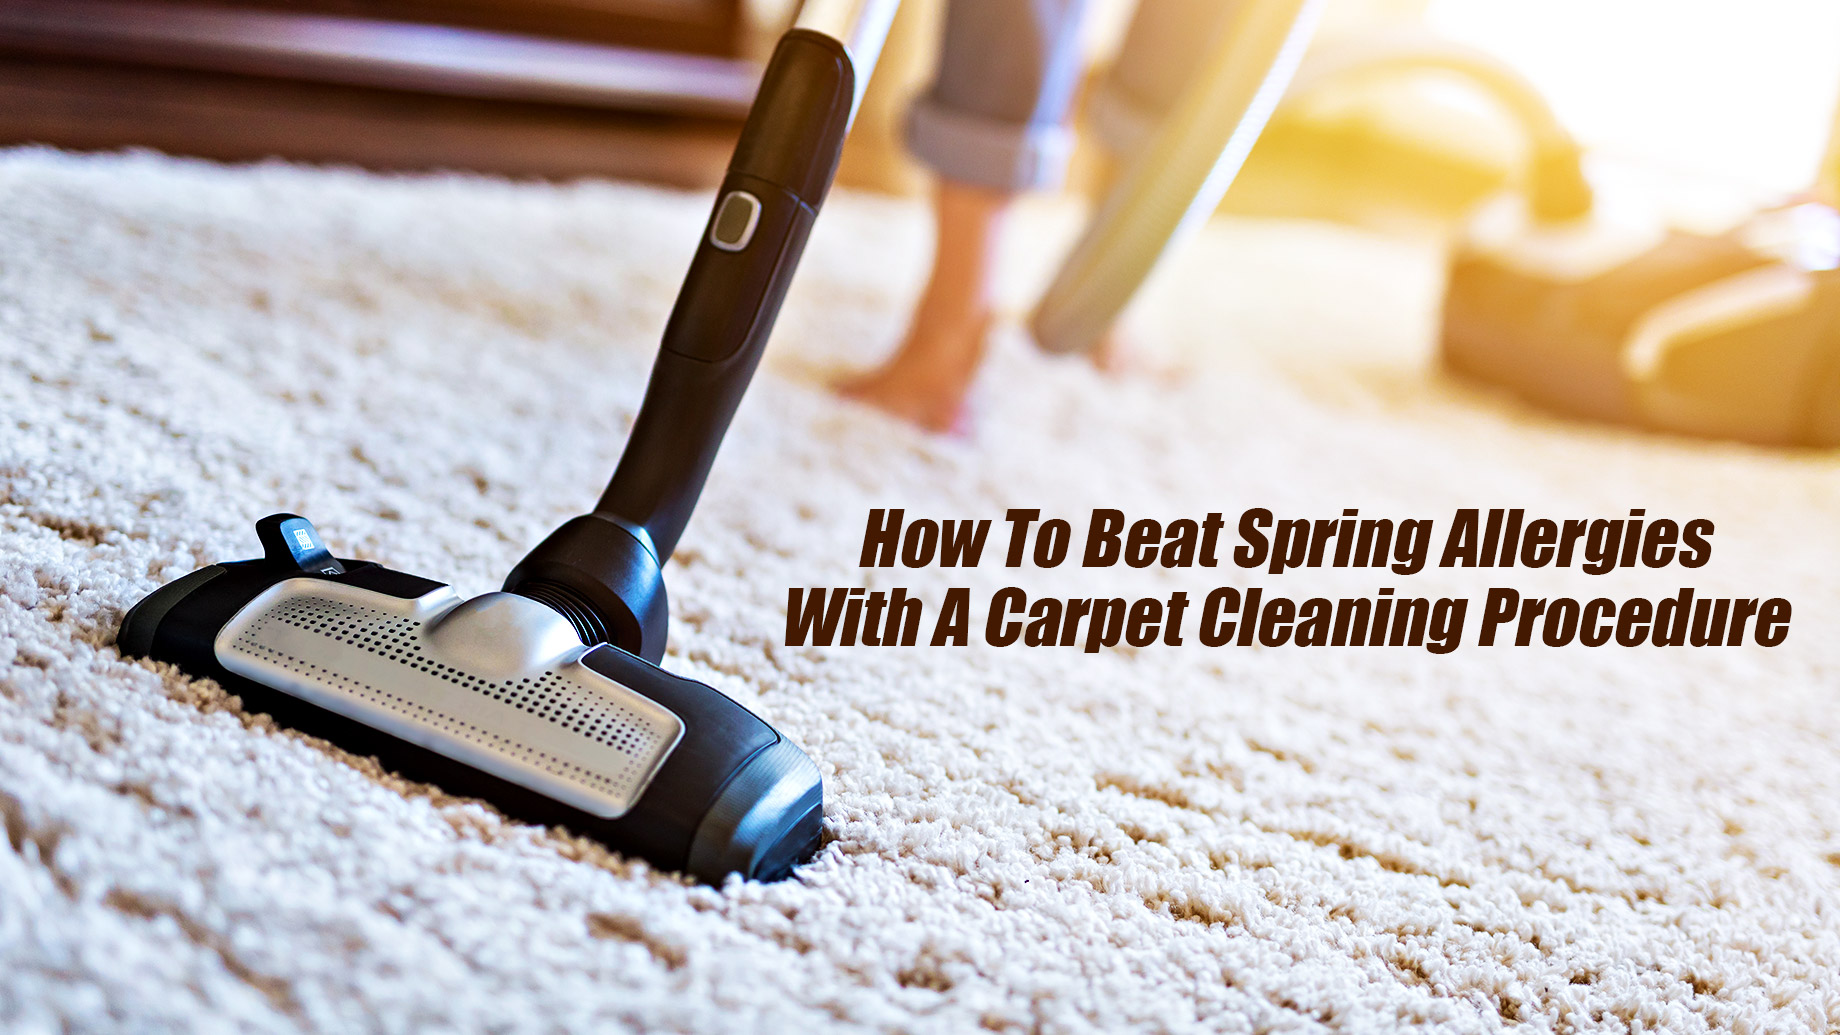 How To Beat Spring Allergies With A Carpet Cleaning Procedure